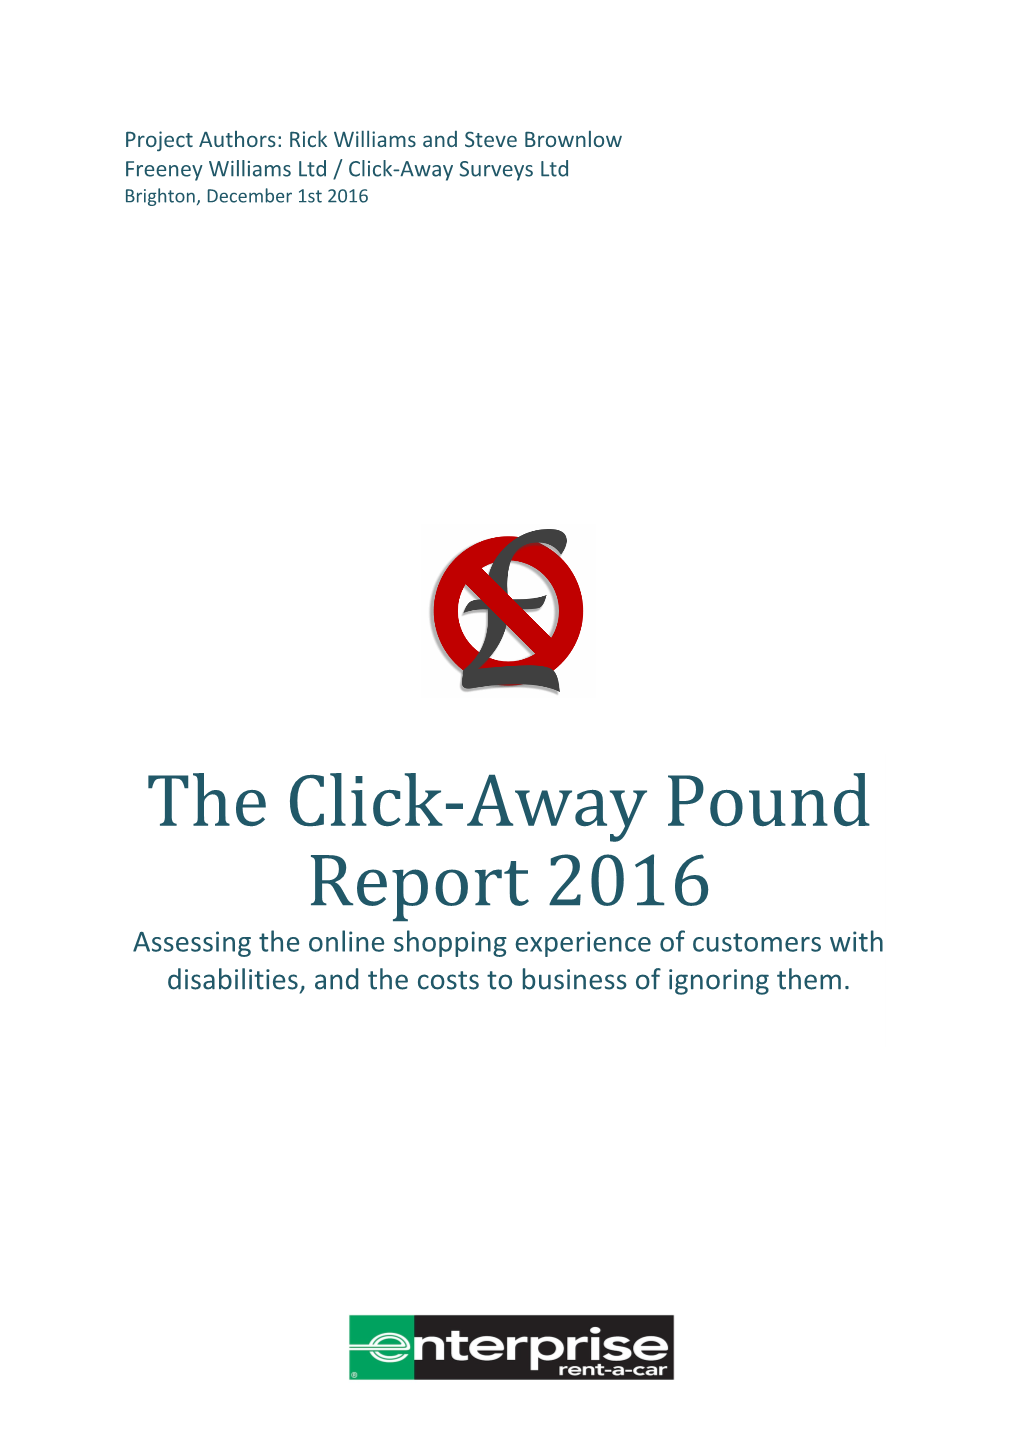 The Click-Away Pound Report 2016